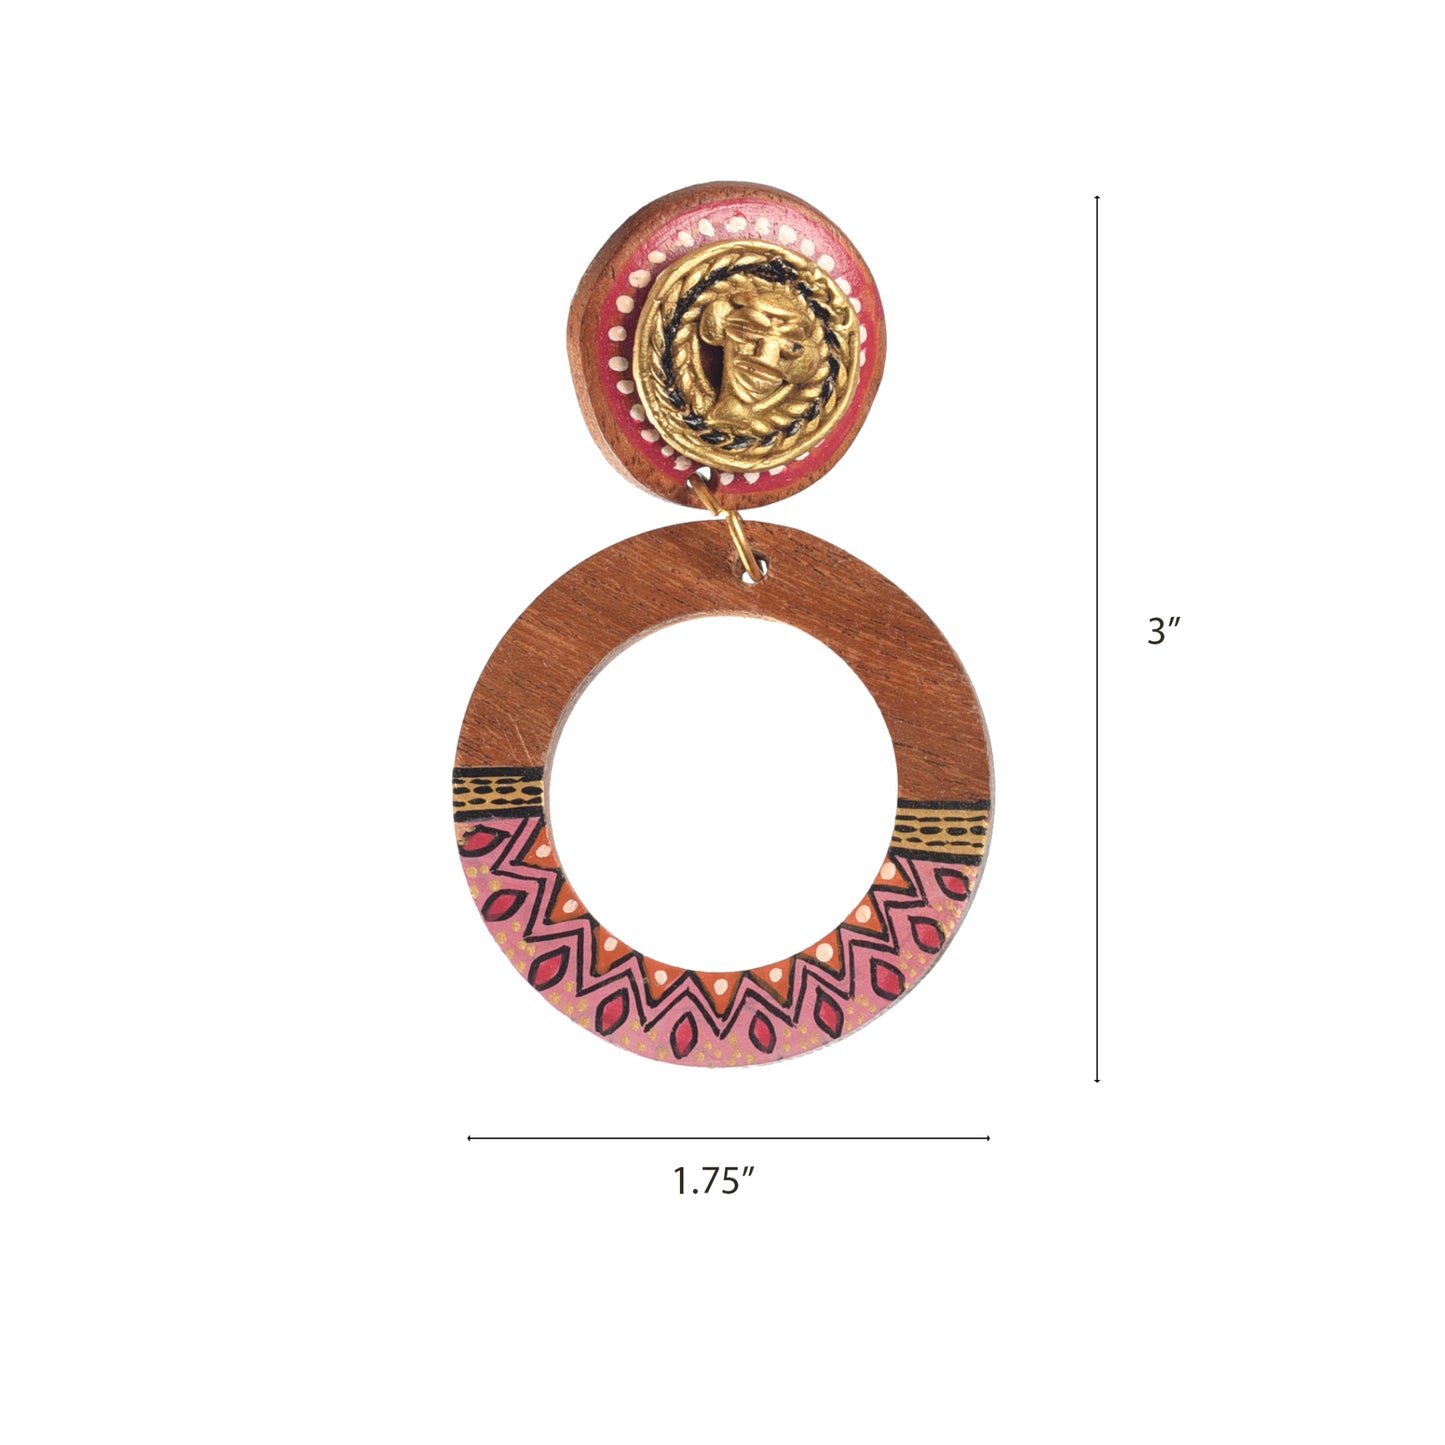 Life's Circle Handcrafted Earrings (Red)